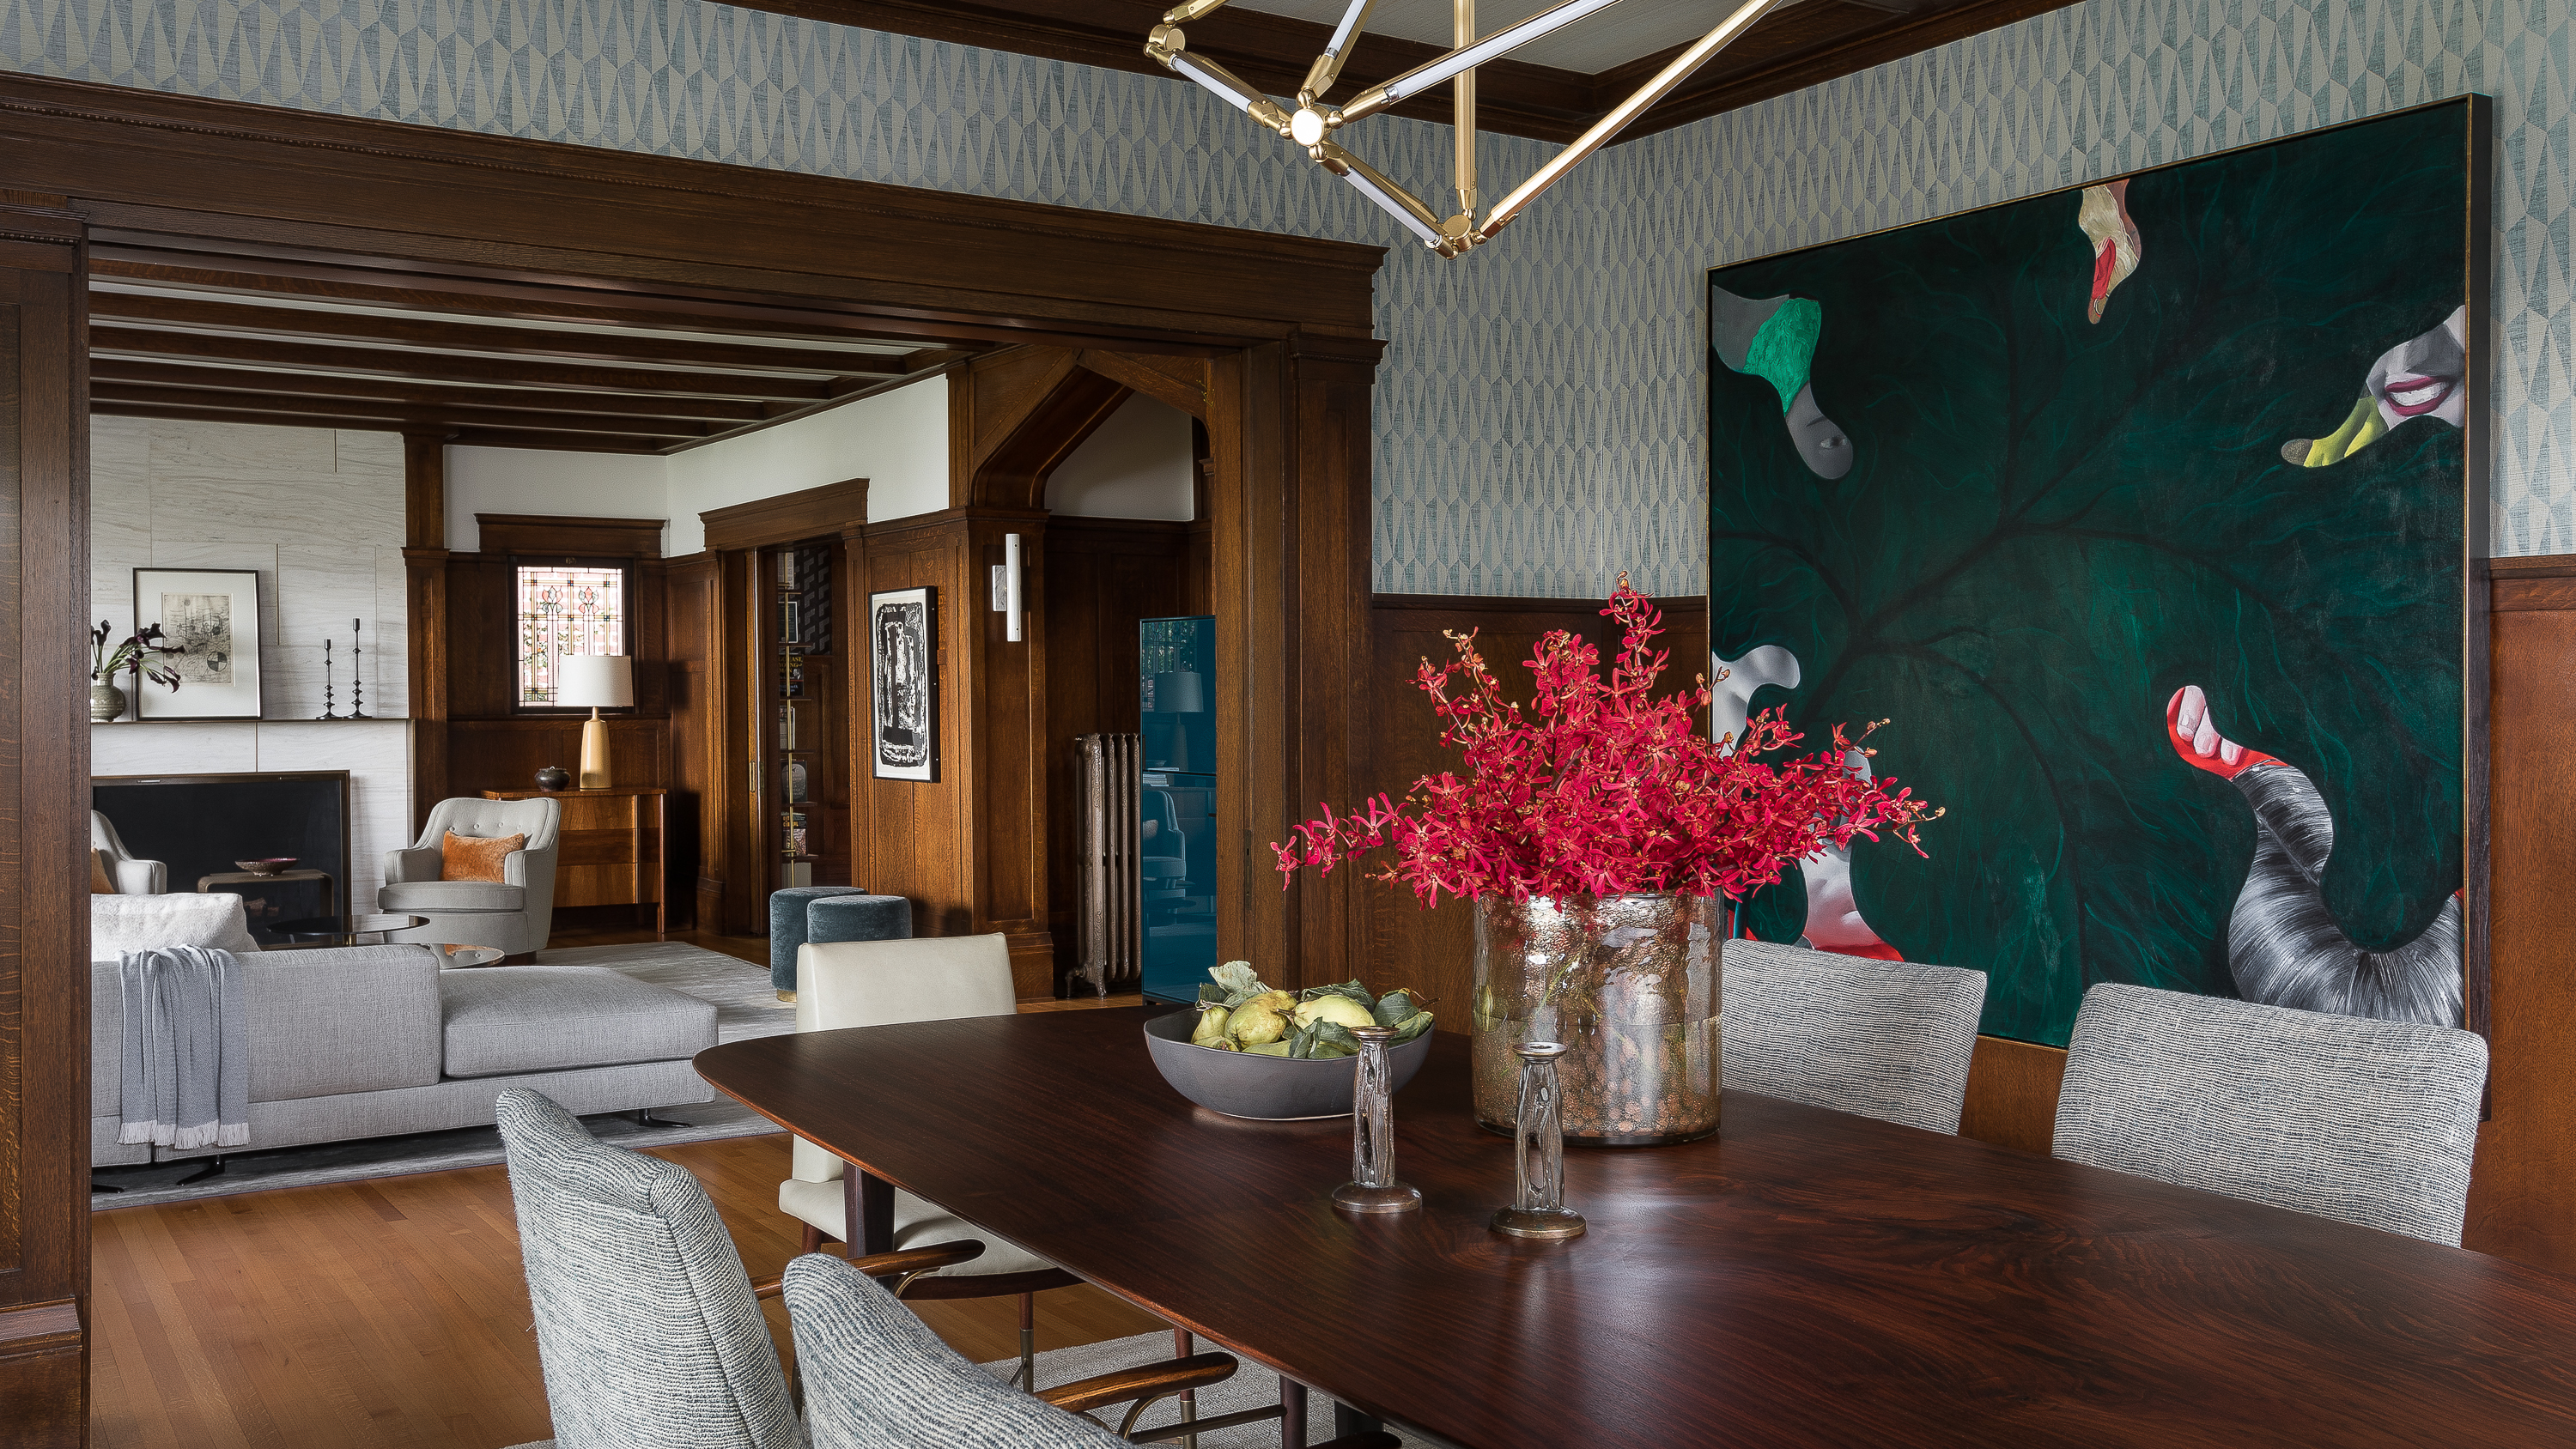 A wall-sized oil painting by Jordan Kasey adds depth and impact to Dining Room.